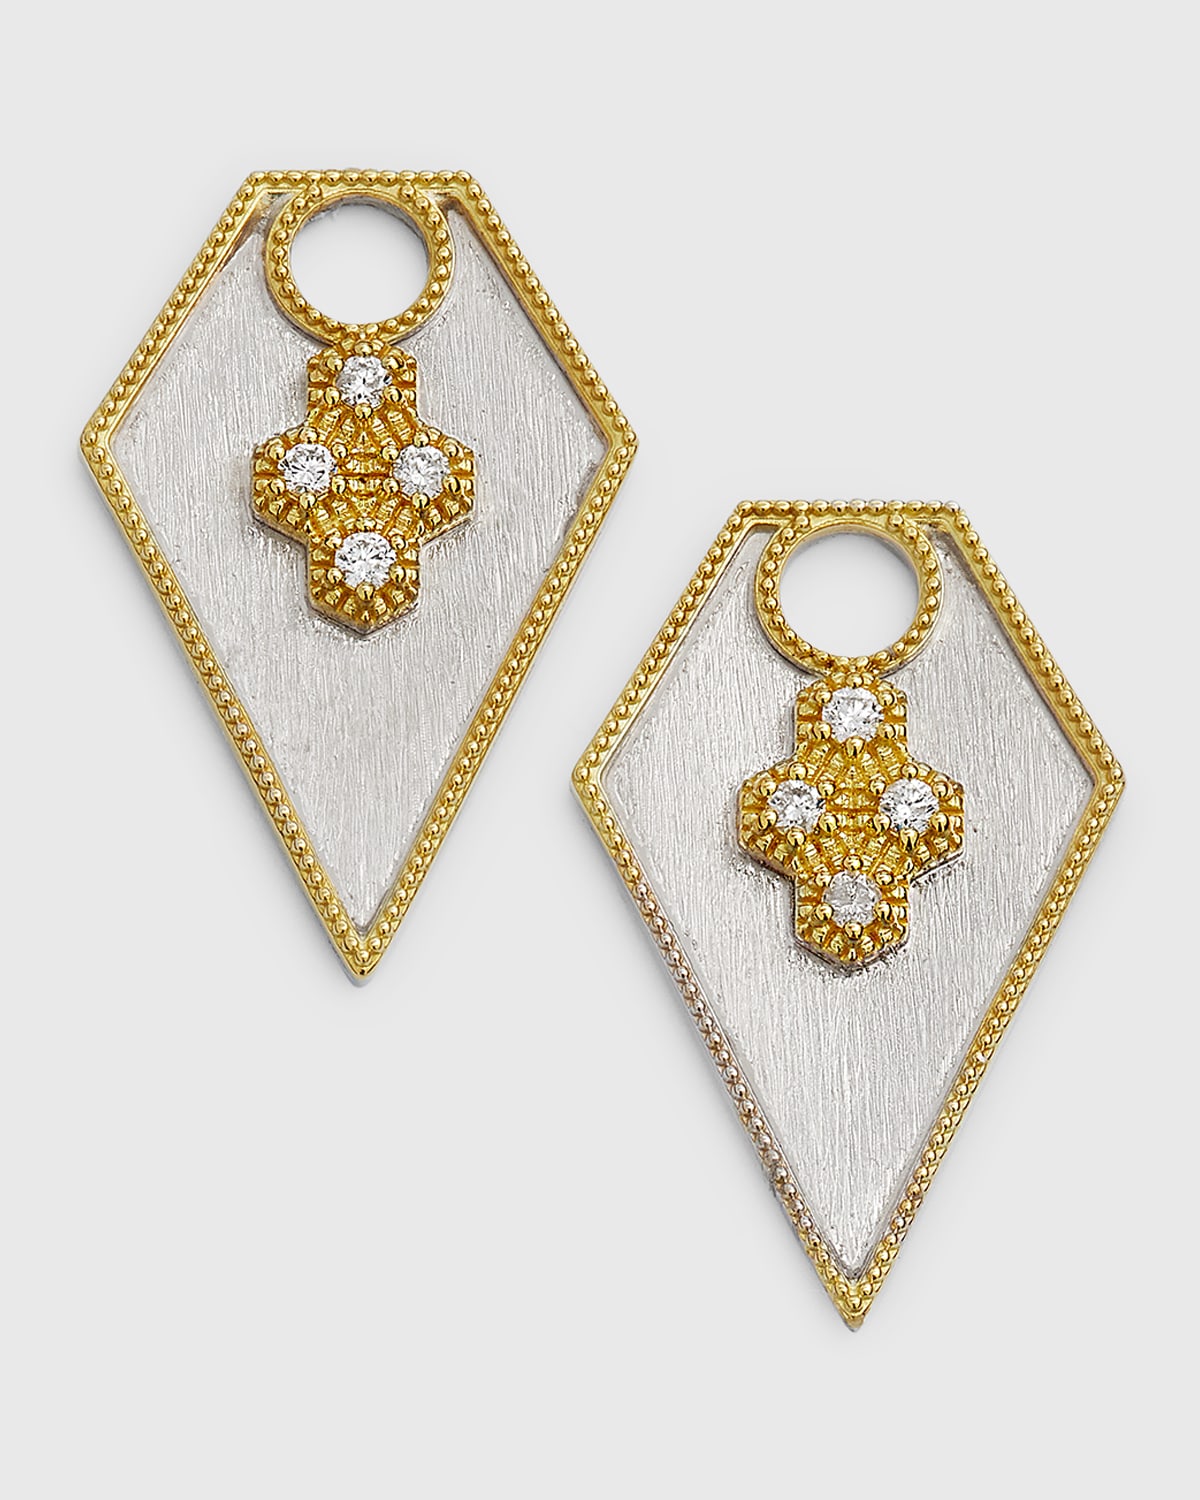 Jude Frances Mixed Metal Shield Earring Charms with Diamonds